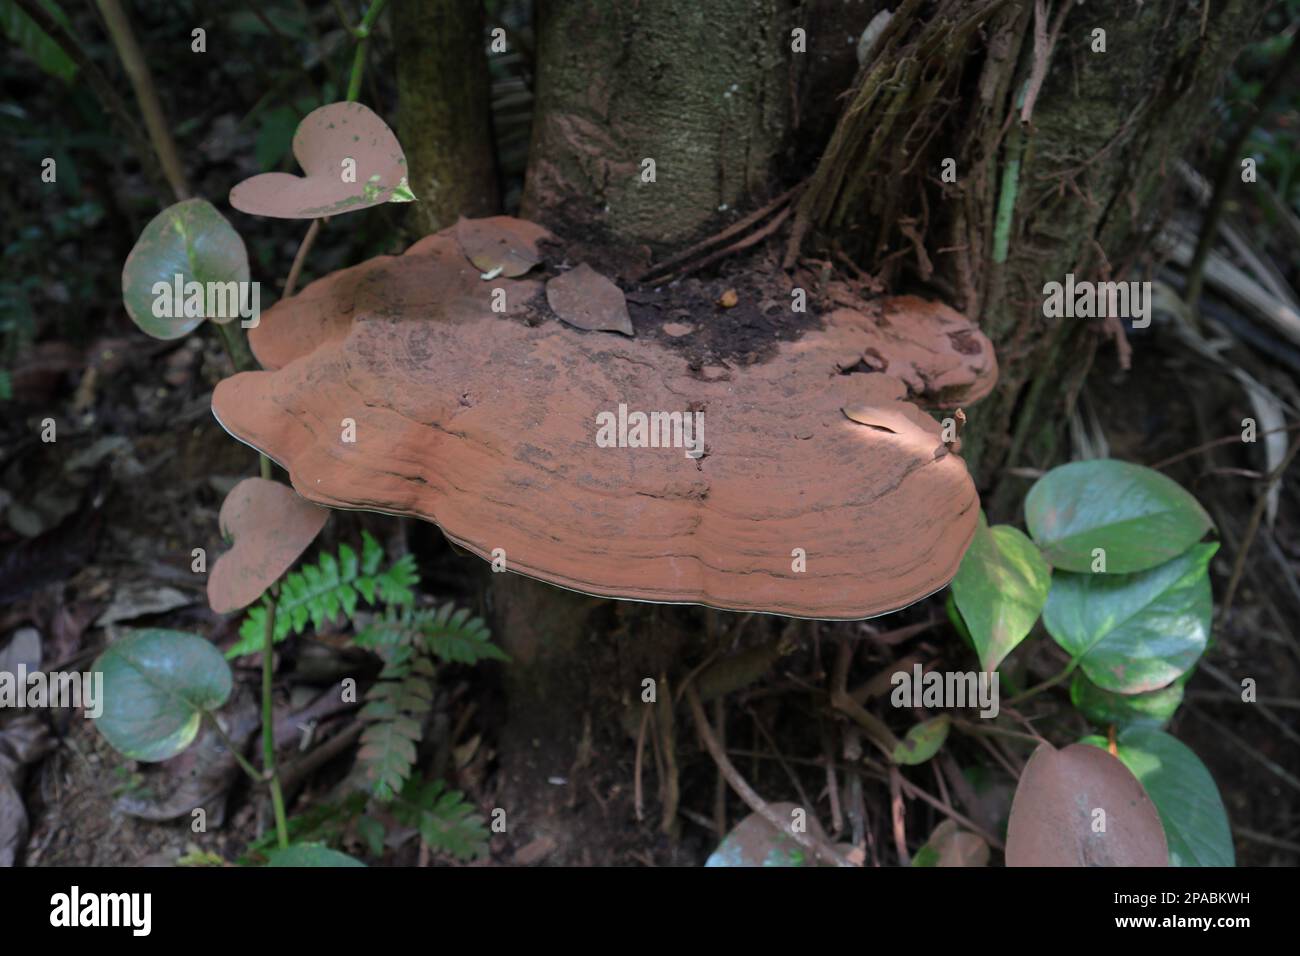 Close up view of an upper reddish surface of an Artist's fungus (Ganoderma Applanatum) mushroom growing on a dying tree trunk in a wild moisture area Stock Photo